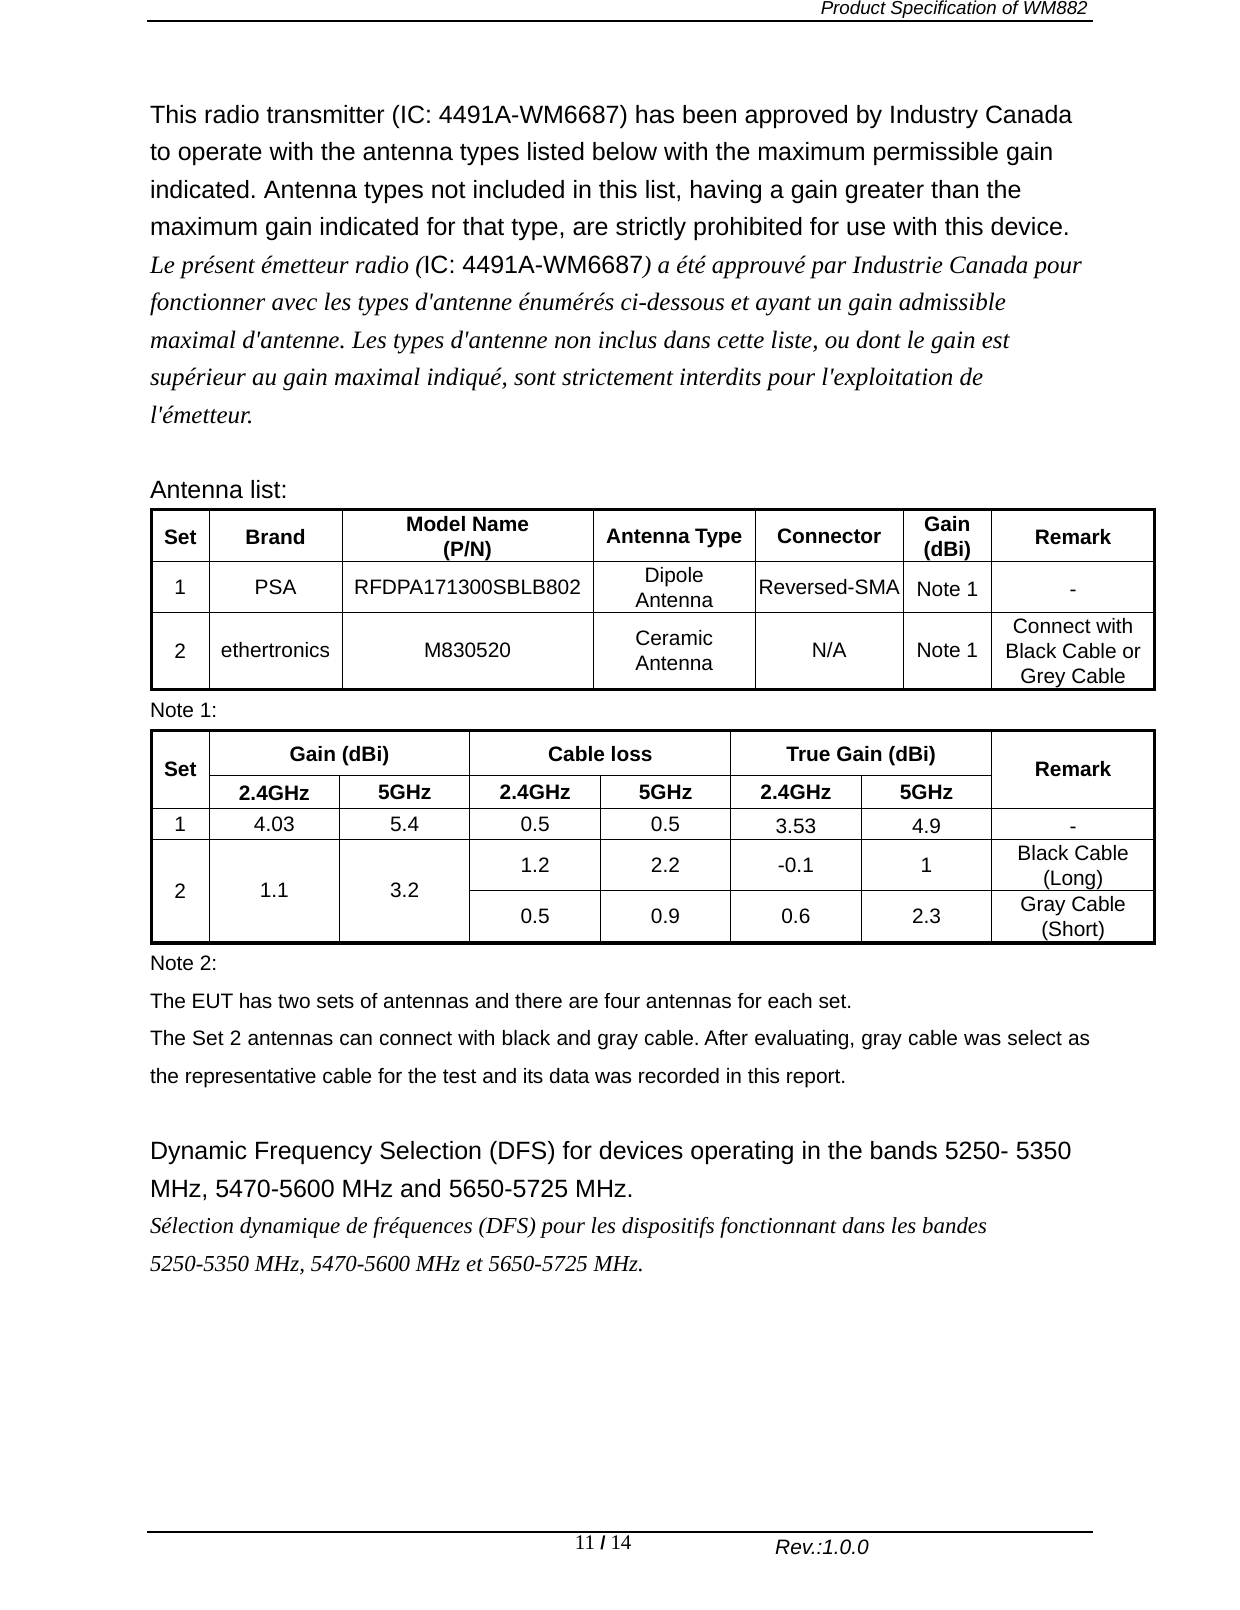   Product Specification of WM882                                                              Rev.:1.0.0 11 / 14  This radio transmitter (IC: 4491A-WM6687) has been approved by Industry Canada to operate with the antenna types listed below with the maximum permissible gain indicated. Antenna types not included in this list, having a gain greater than the maximum gain indicated for that type, are strictly prohibited for use with this device.   Le présent émetteur radio (IC: 4491A-WM6687) a été approuvé par Industrie Canada pour fonctionner avec les types d&apos;antenne énumérés ci-dessous et ayant un gain admissible maximal d&apos;antenne. Les types d&apos;antenne non inclus dans cette liste, ou dont le gain est supérieur au gain maximal indiqué, sont strictement interdits pour l&apos;exploitation de l&apos;émetteur.  Antenna list: Set Brand  Model Name (P/N)  Antenna Type  Connector  Gain (dBi)  Remark 1  PSA RFDPA171300SBLB802  Dipole  Antenna  Reversed-SMA  Note 1  - 2  ethertronics M830520  Ceramic  Antenna  N/A Note 1 Connect with Black Cable or Grey Cable   Note 1: Gain (dBi)  Cable loss  True Gain (dBi) Set  2.4GHz  5GHz 2.4GHz 5GHz 2.4GHz 5GHz  Remark 1  4.03 5.4  0.5  0.5  3.53 4.9  - 1.2  2.2 -0.1  1 Black Cable (Long) 2  1.1 3.2 0.5  0.9 0.6 2.3 Gray Cable (Short) Note 2: The EUT has two sets of antennas and there are four antennas for each set. The Set 2 antennas can connect with black and gray cable. After evaluating, gray cable was select as the representative cable for the test and its data was recorded in this report.  Dynamic Frequency Selection (DFS) for devices operating in the bands 5250- 5350 MHz, 5470-5600 MHz and 5650-5725 MHz. Sélection dynamique de fréquences (DFS) pour les dispositifs fonctionnant dans les bandes 5250-5350 MHz, 5470-5600 MHz et 5650-5725 MHz.  